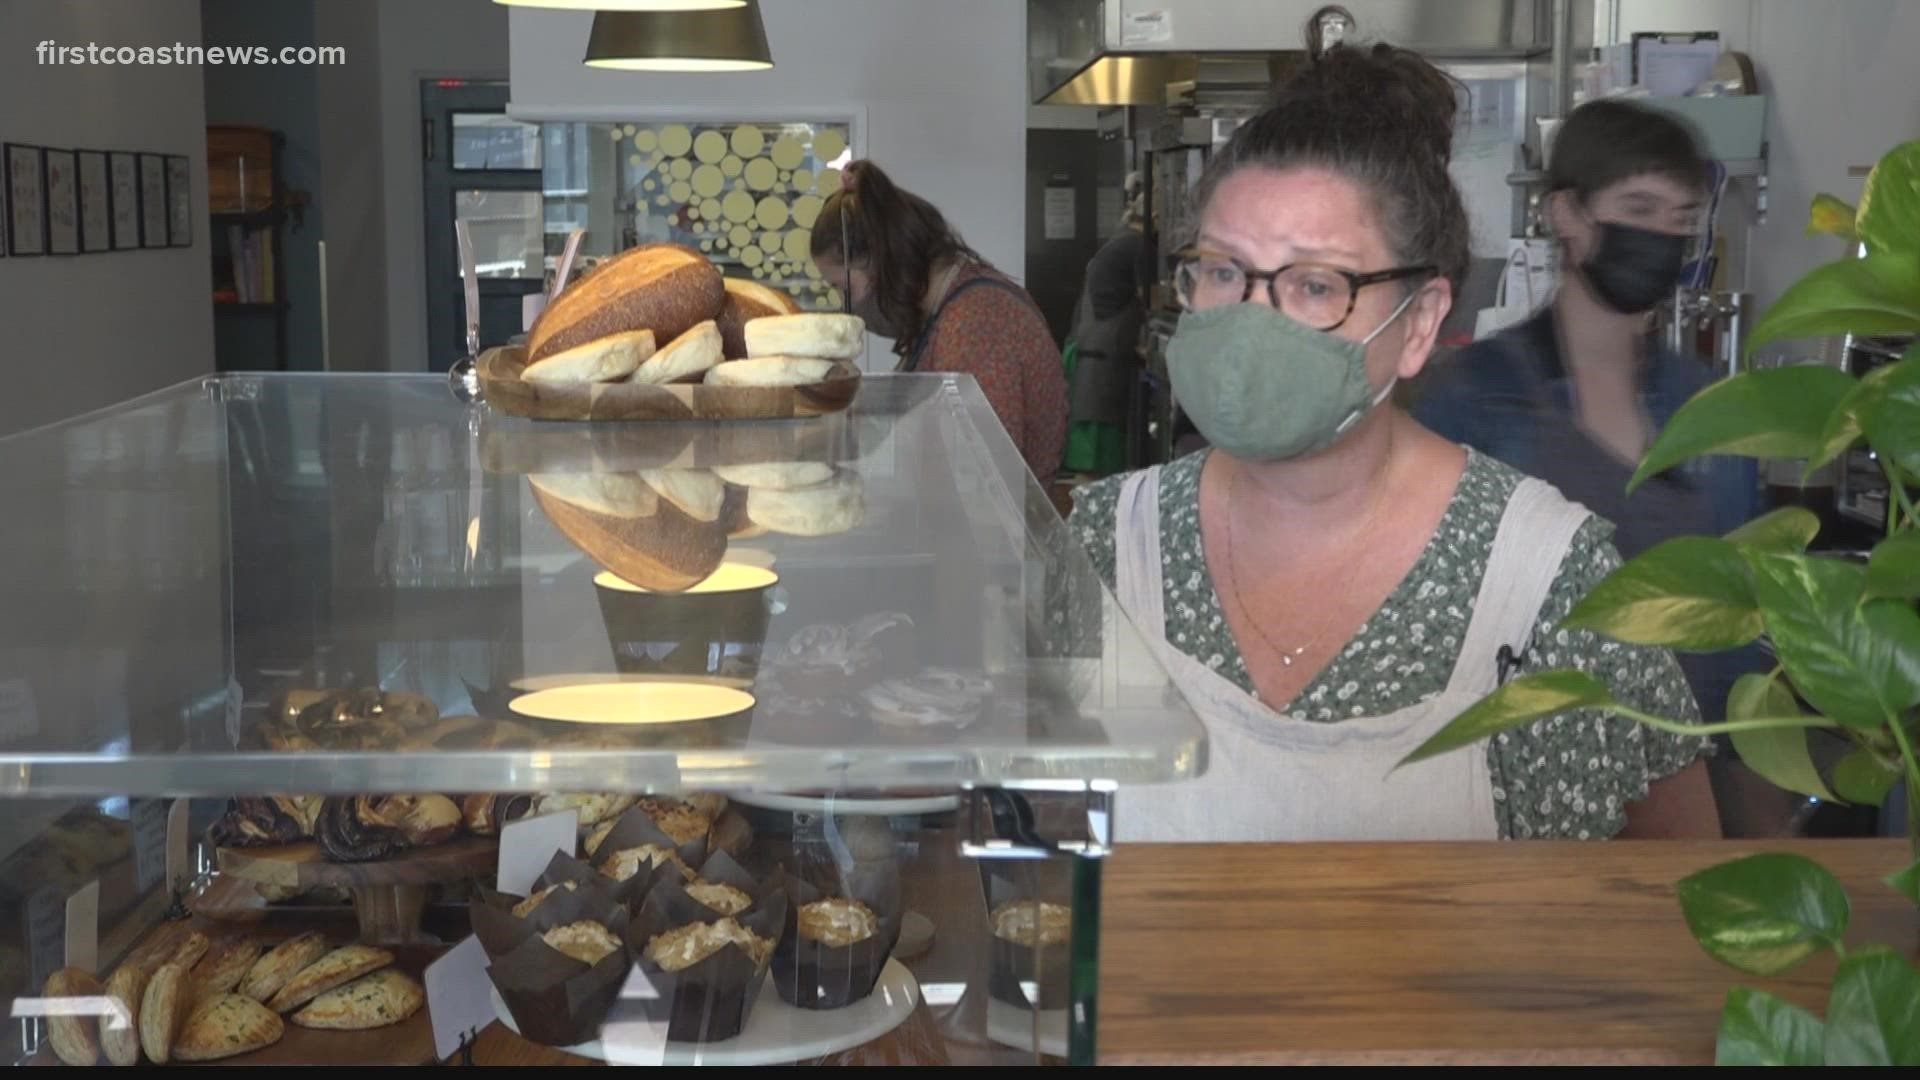 Some restaurants in Jacksonville are now requiring masks again